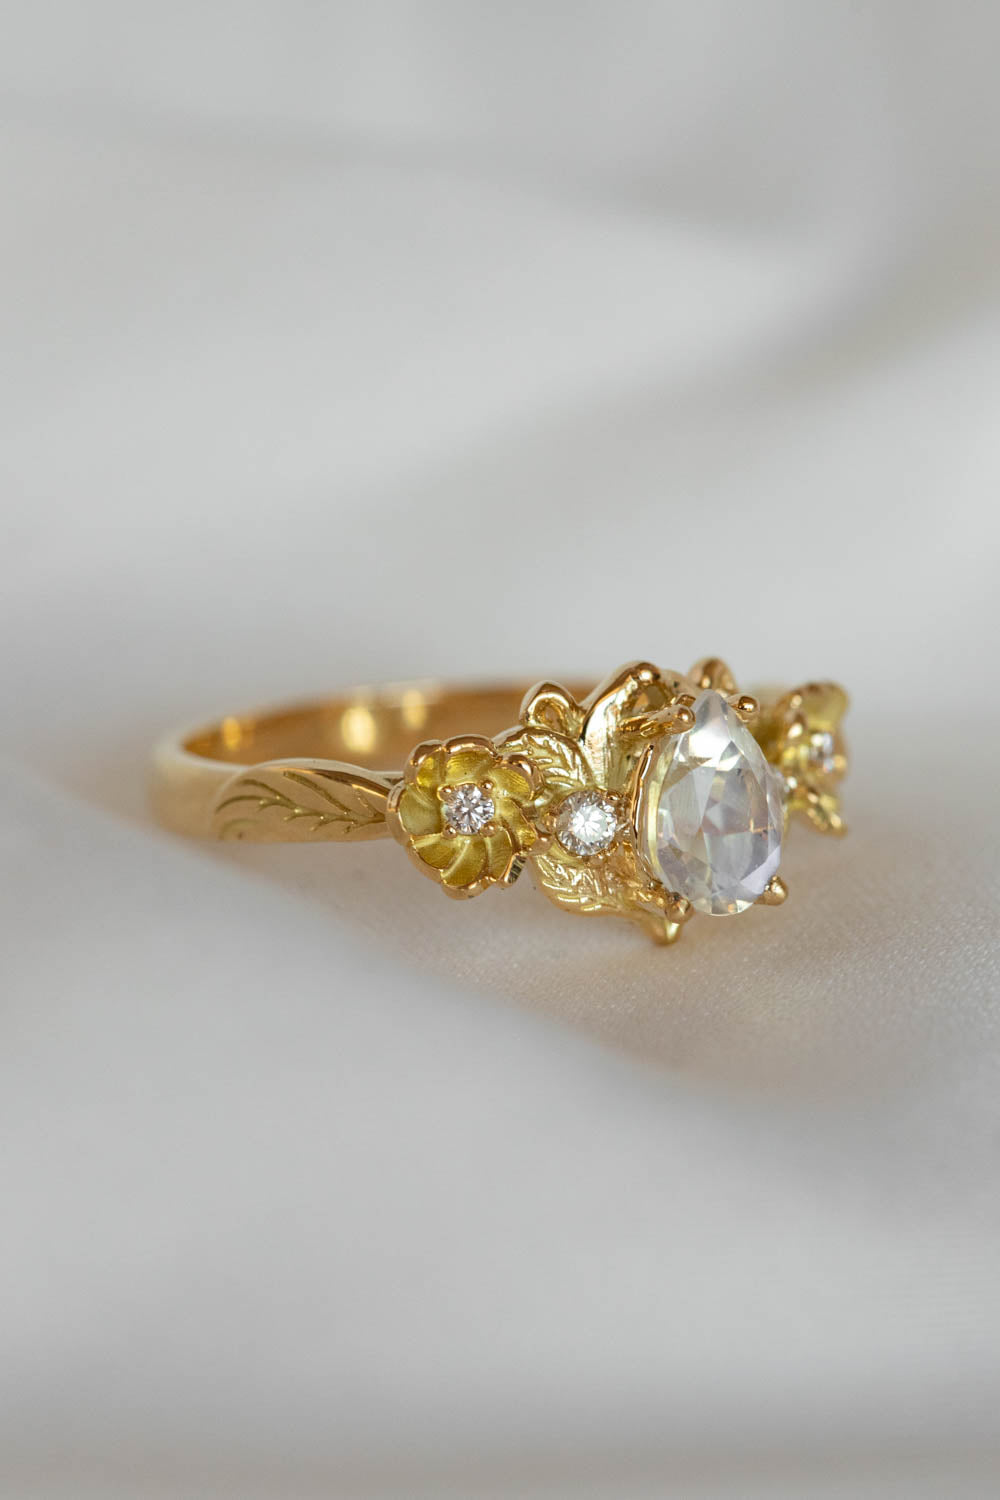 READY TO SHIP: Adelina in 18K yellow gold, natural pear cut moonstone 7x5 mm, moissanites, RING SIZE 8 US - Eden Garden Jewelry™